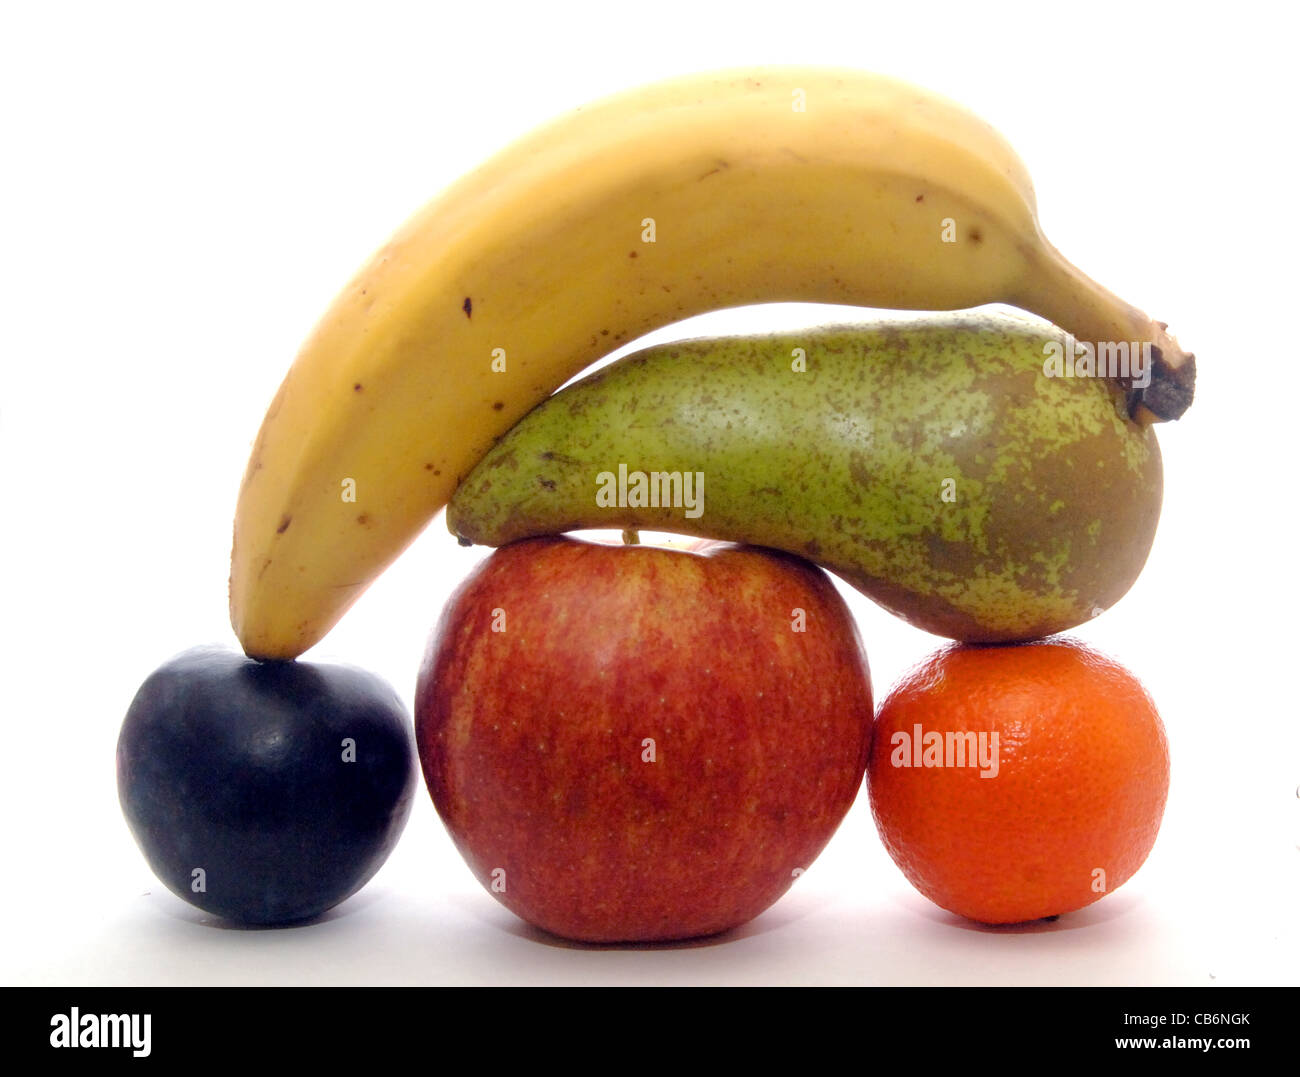 Five pieces of fruit. Stock Photo